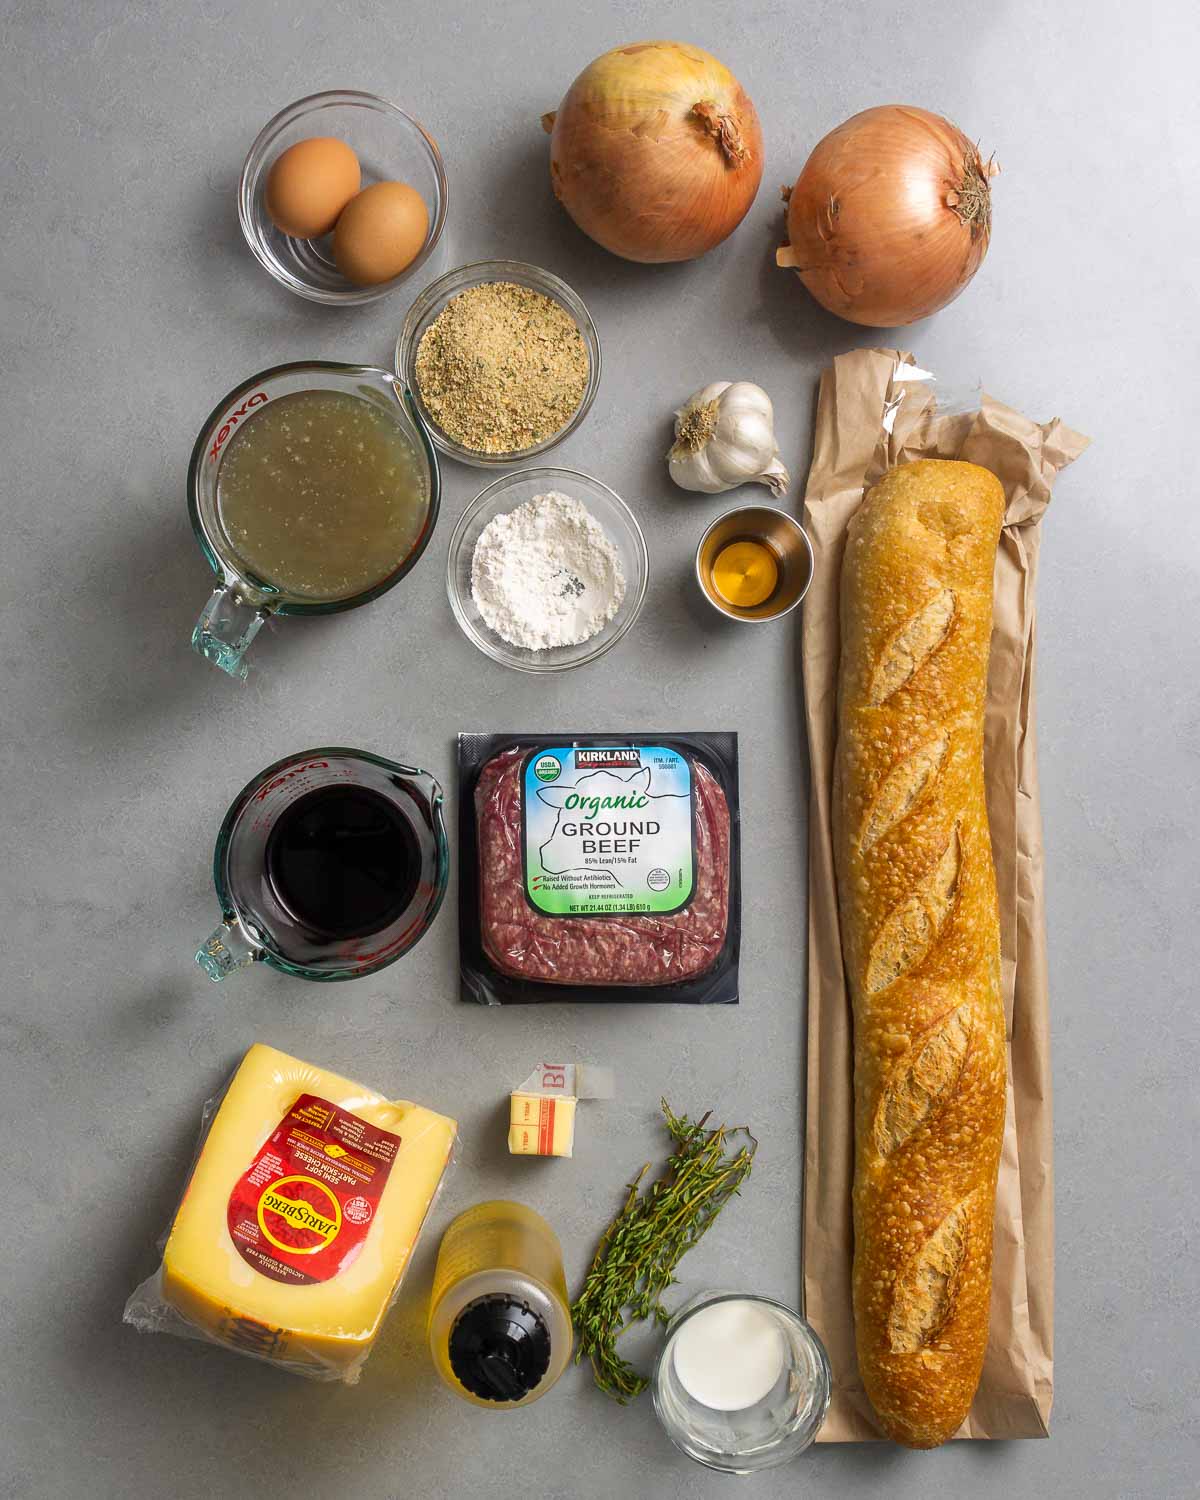 Ingredients shown: eggs, chicken stock, breadcrumbs, flour, onions, garlic, brandy, baguette, red wine, ground beeg, swiss cheese, butter, olive oil, thyme, and milk.